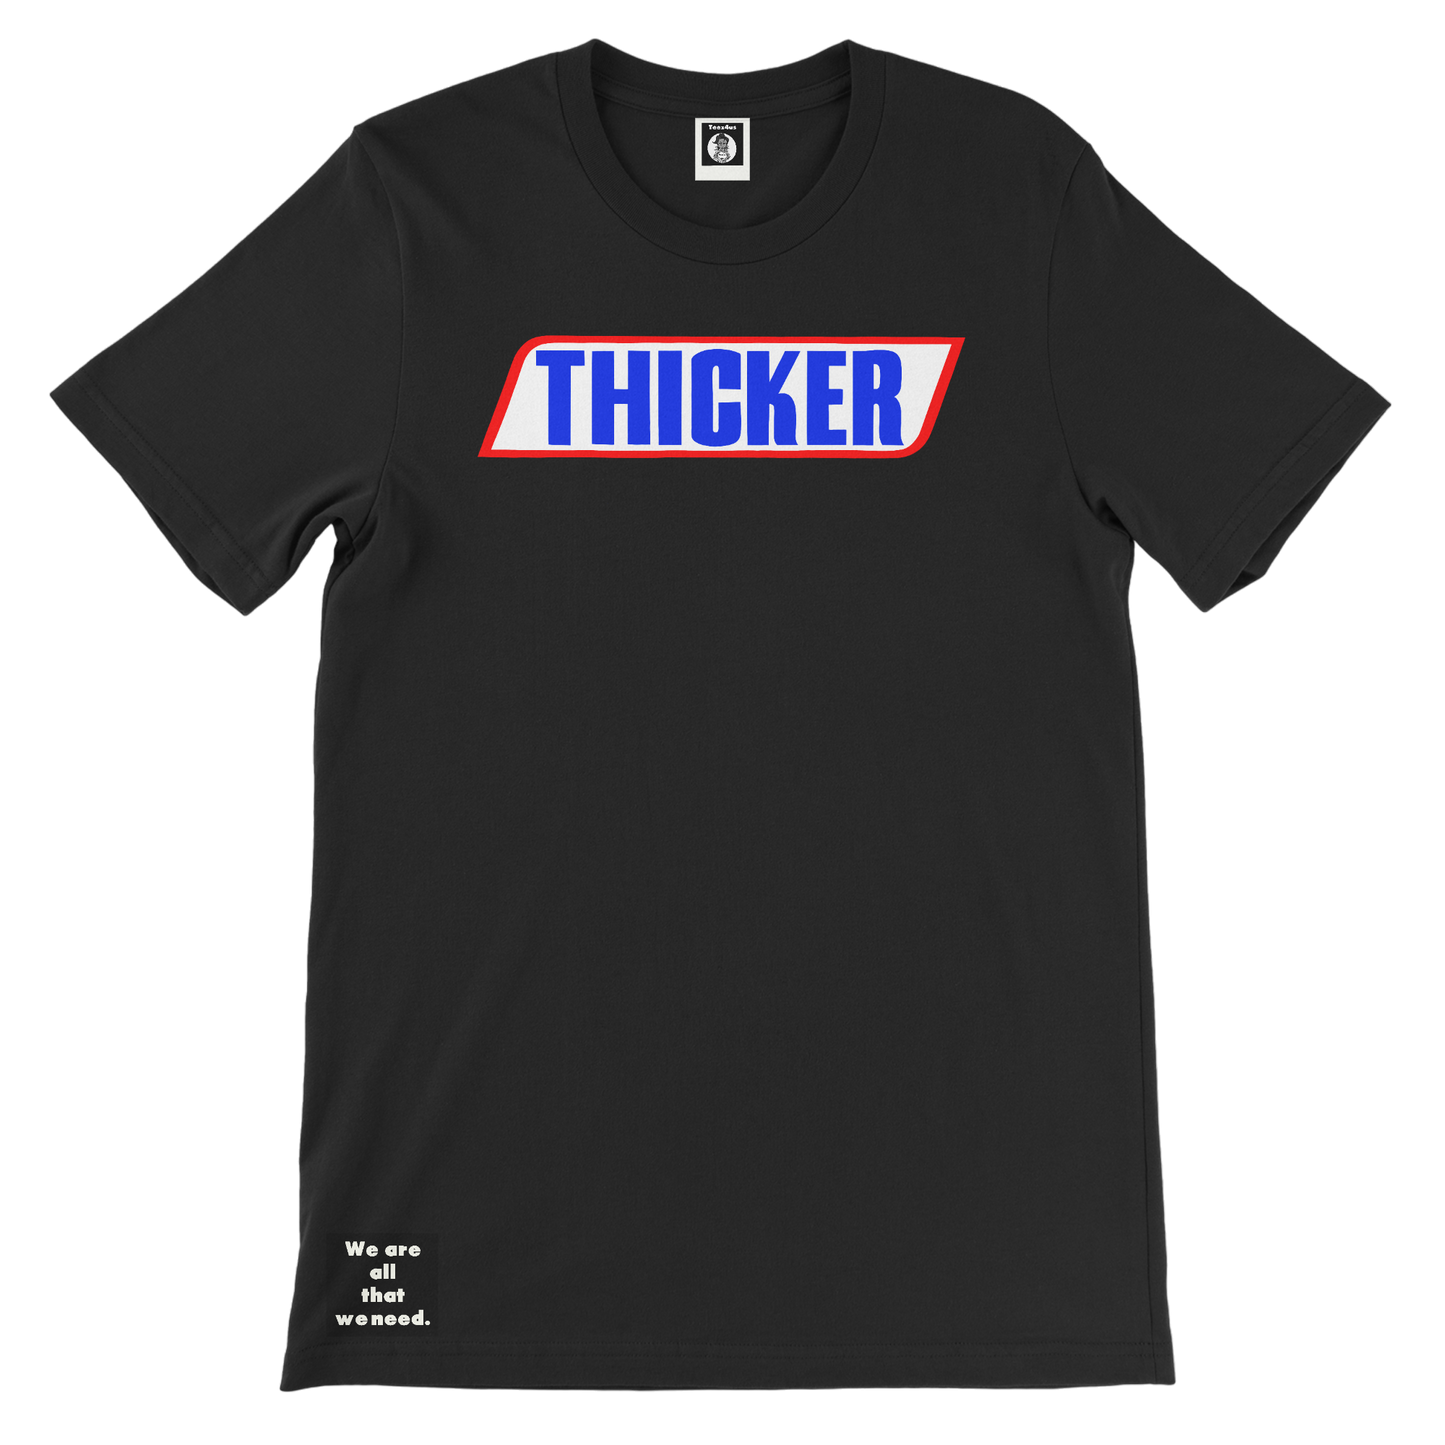 Thicker Tee